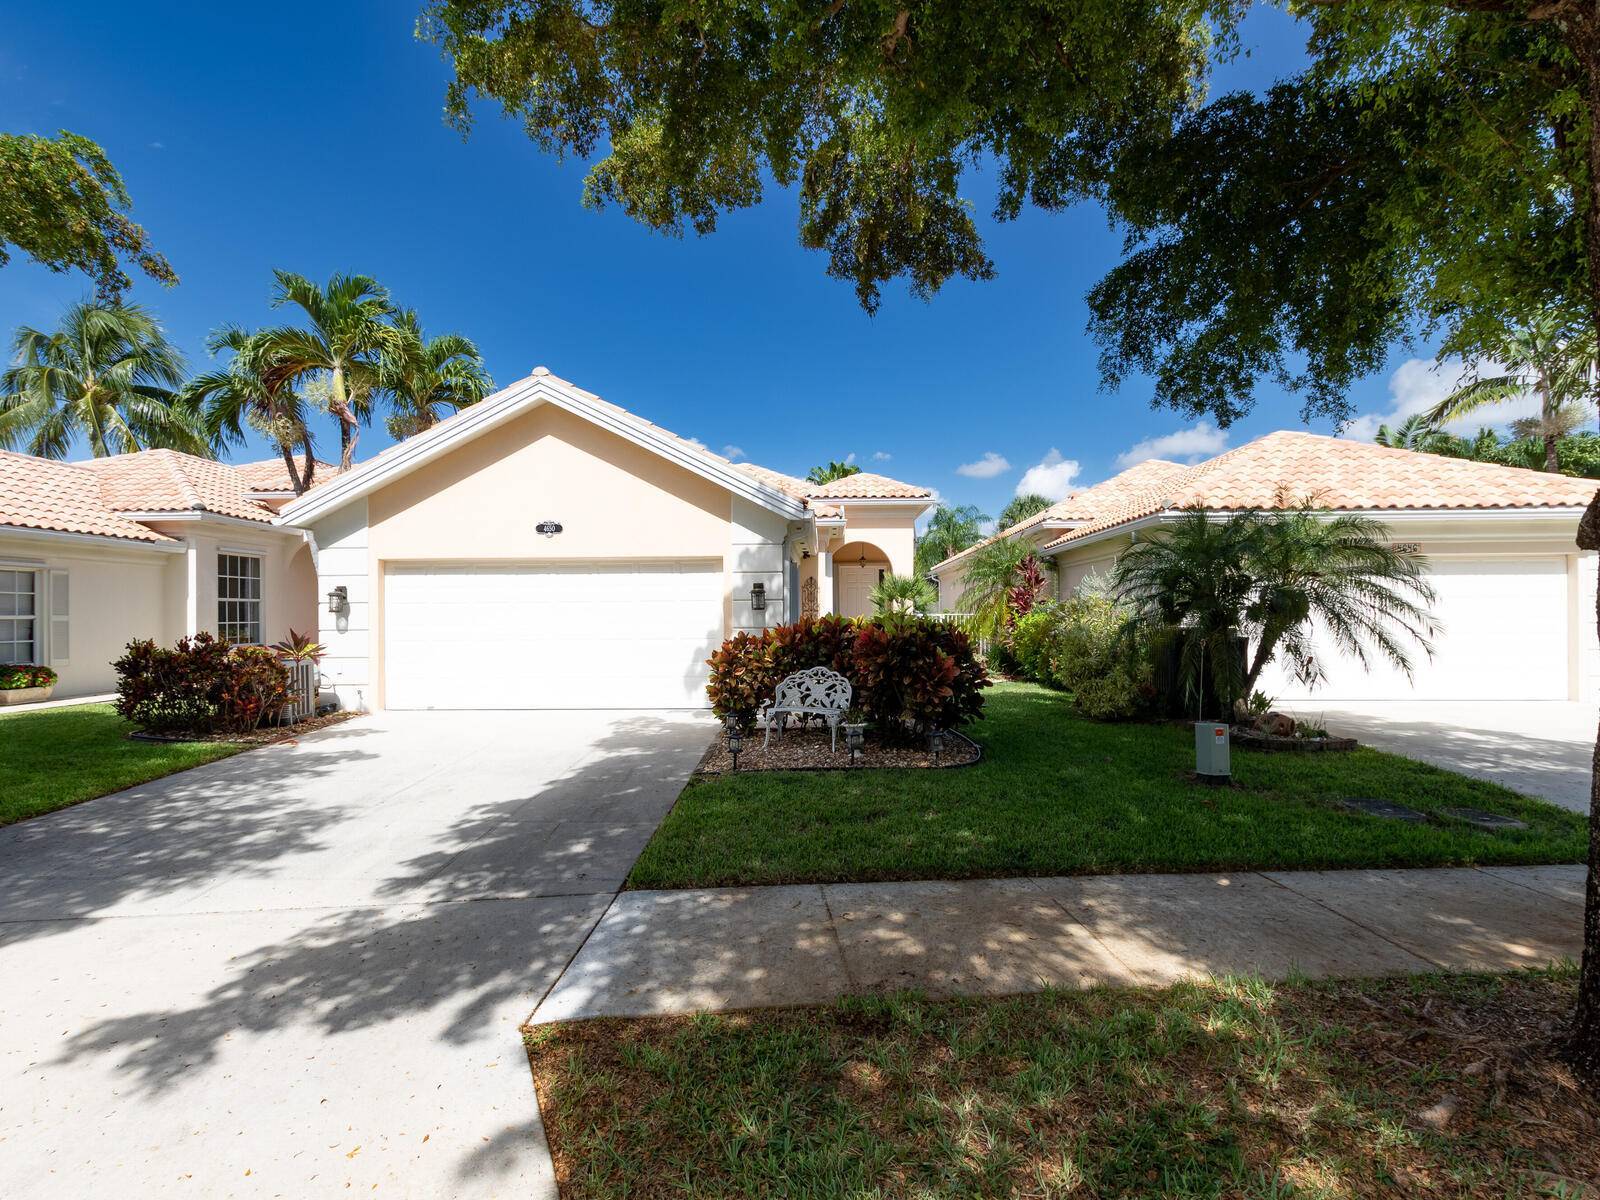 Super Clean 3 Bedroom 2 Bath Home in highly desirable Gated community in Delray Beach.